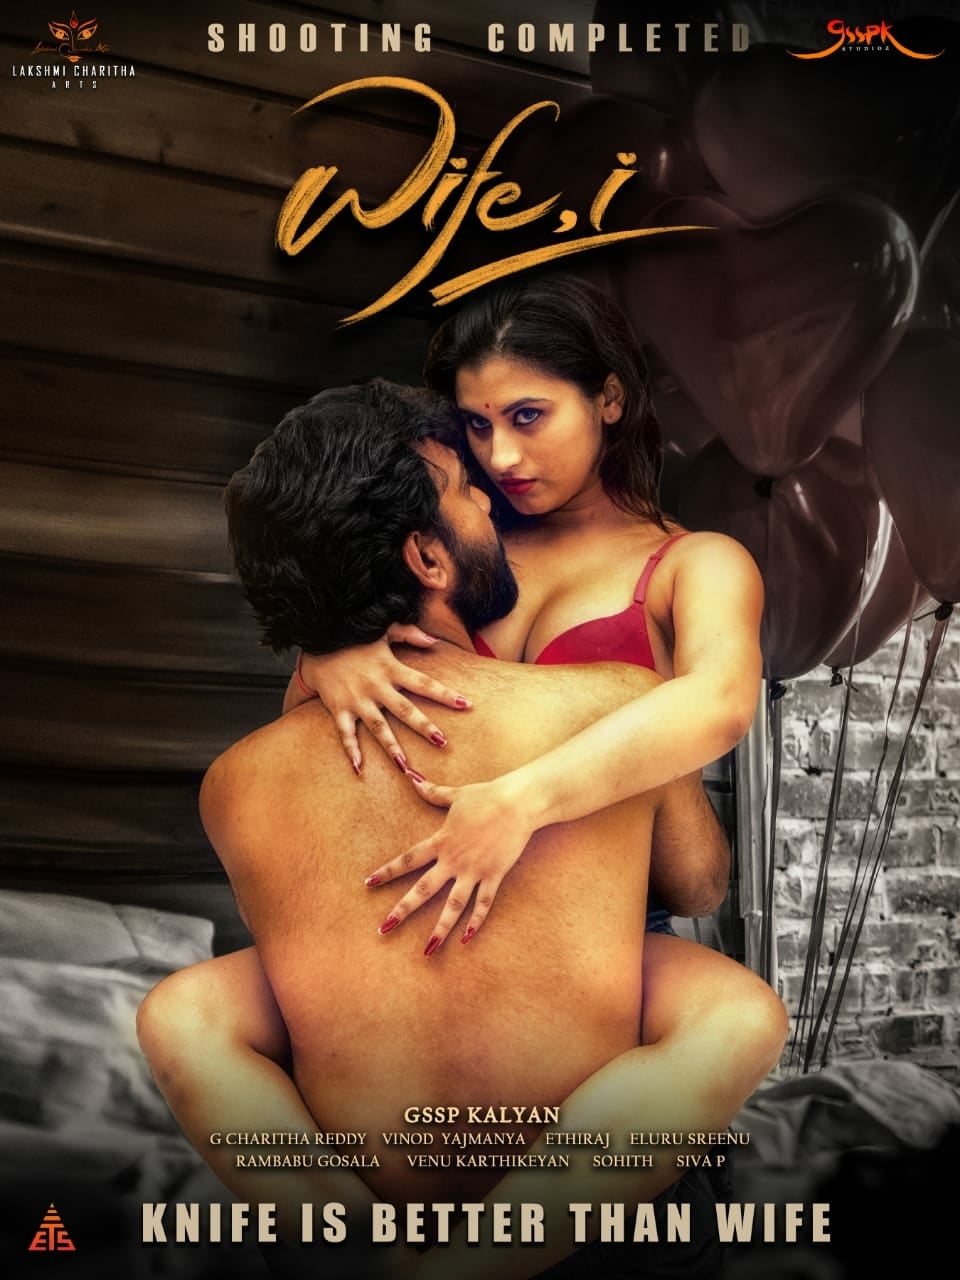 Poster for the movie "Wife, i"